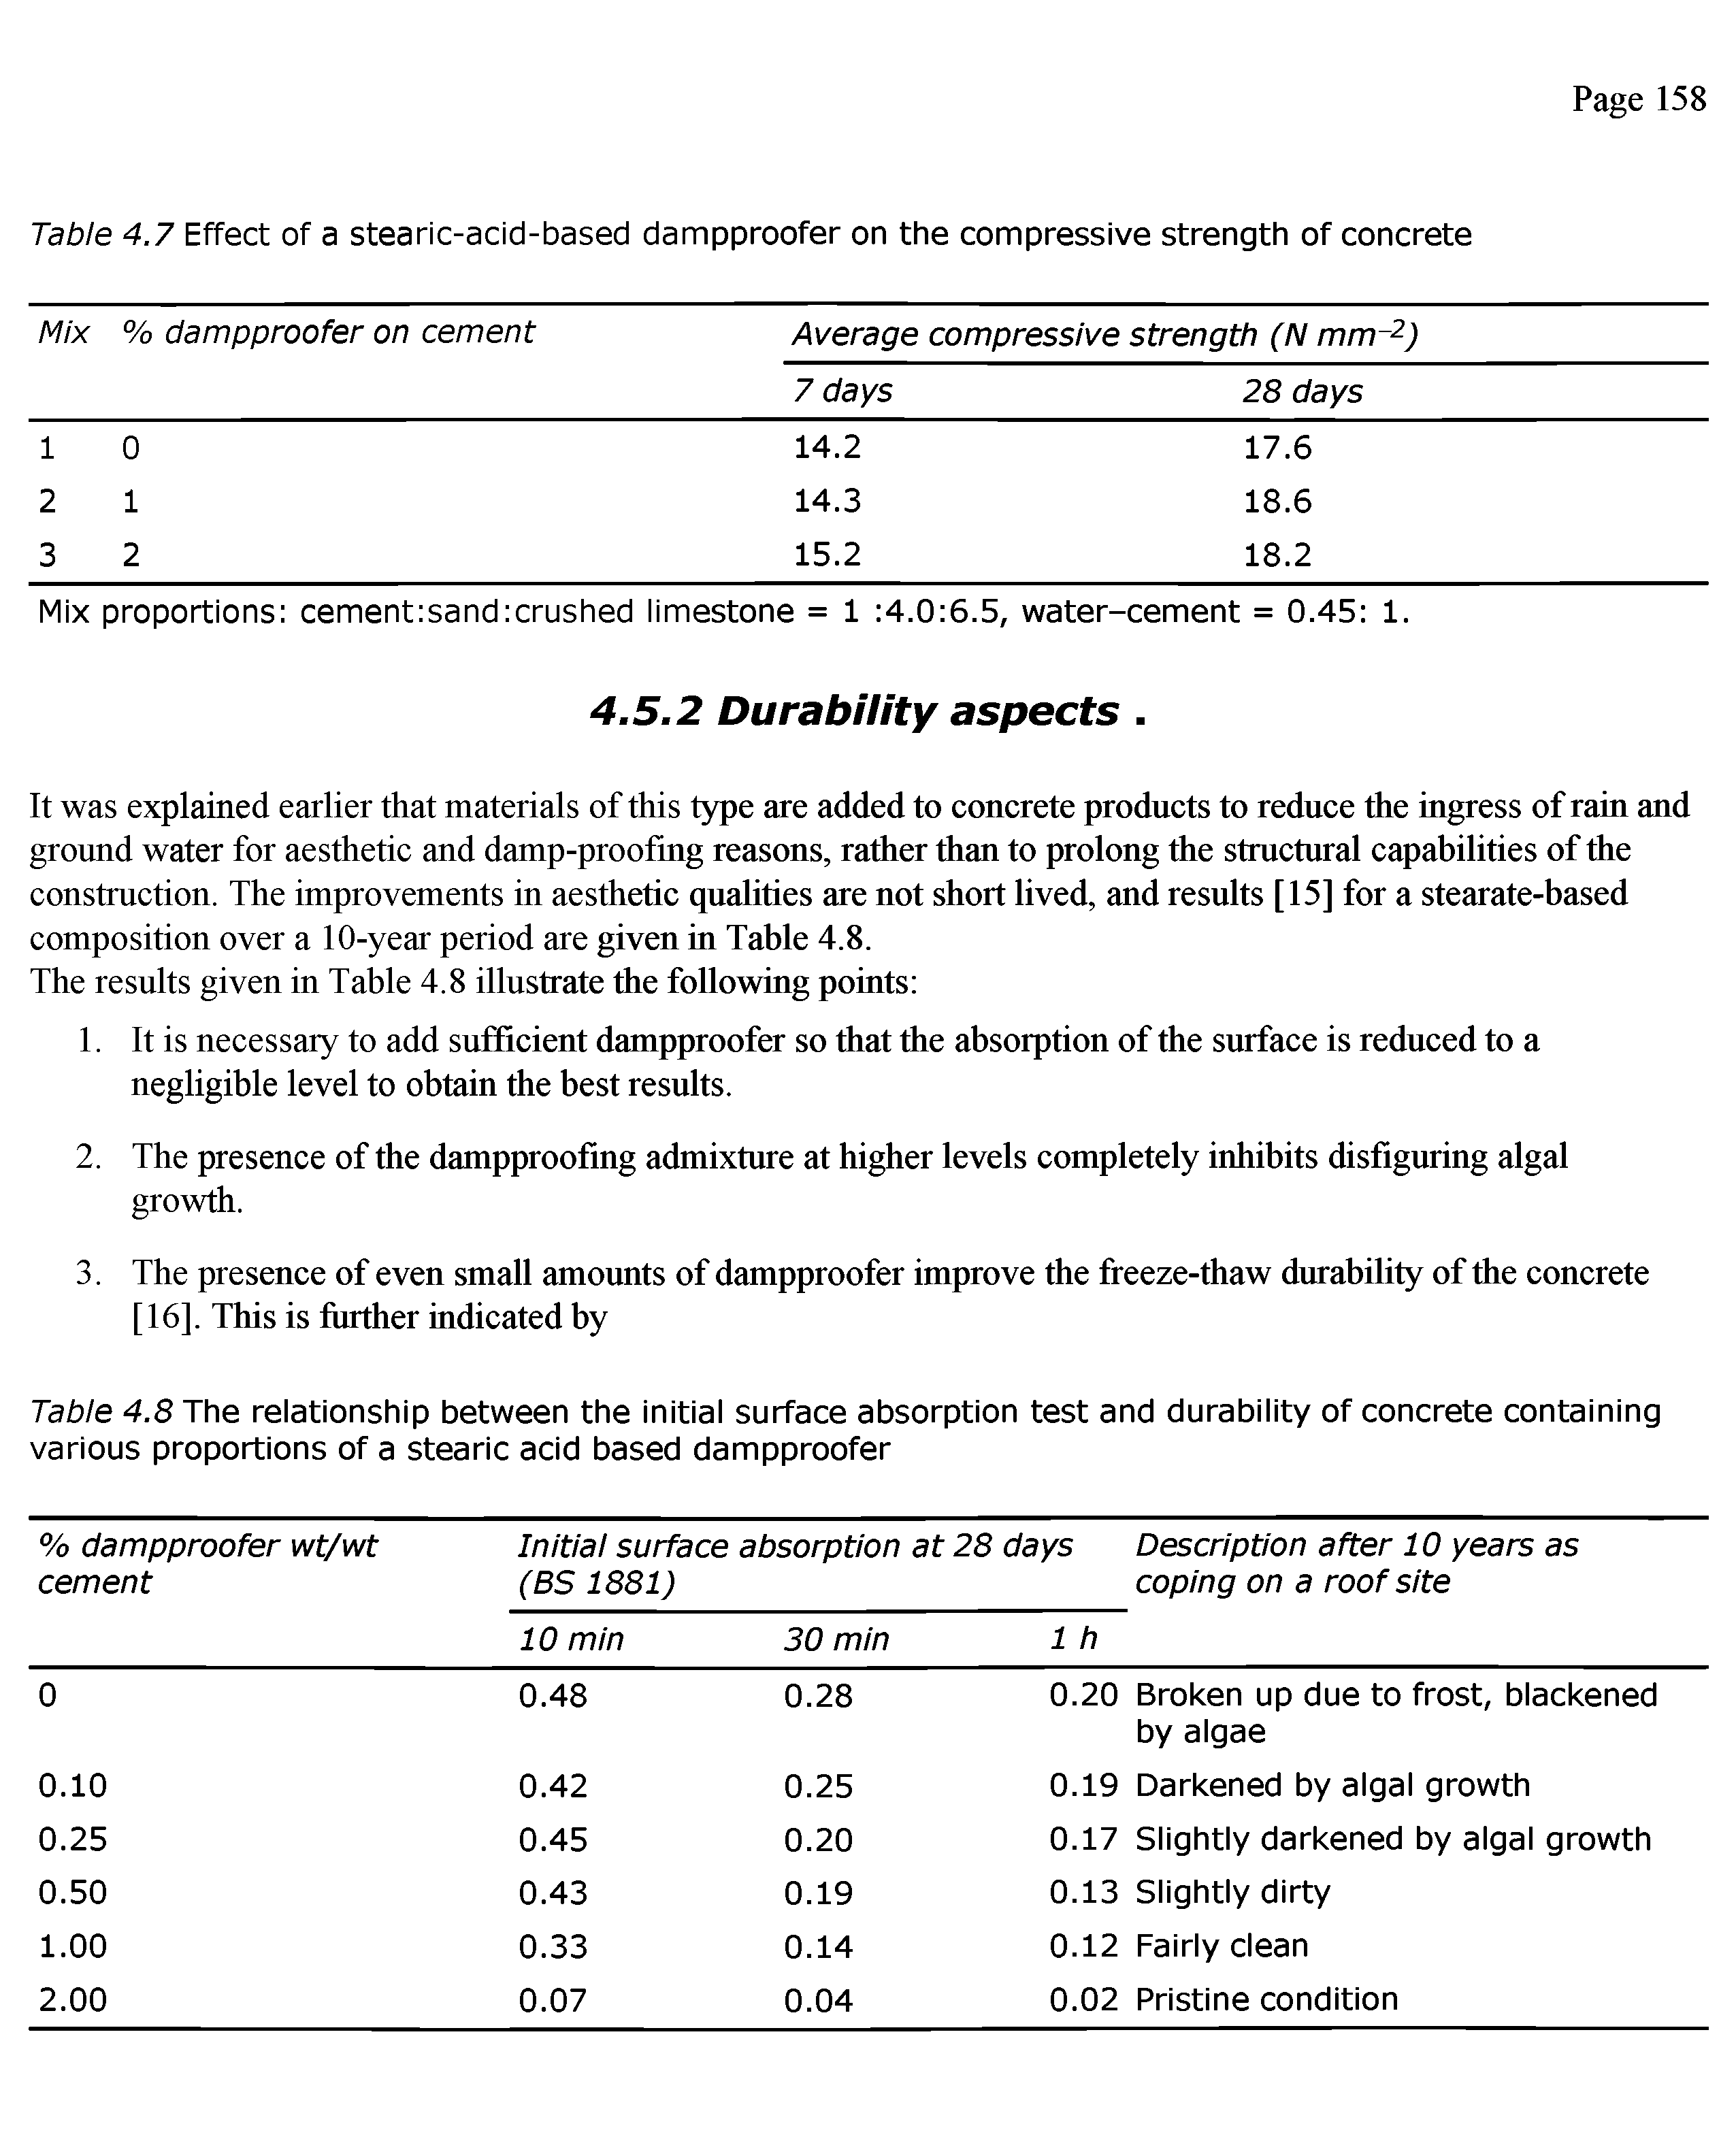 Table 4.7 Effect of a stearic-acid-based dampproofer on the compressive strength of concrete...